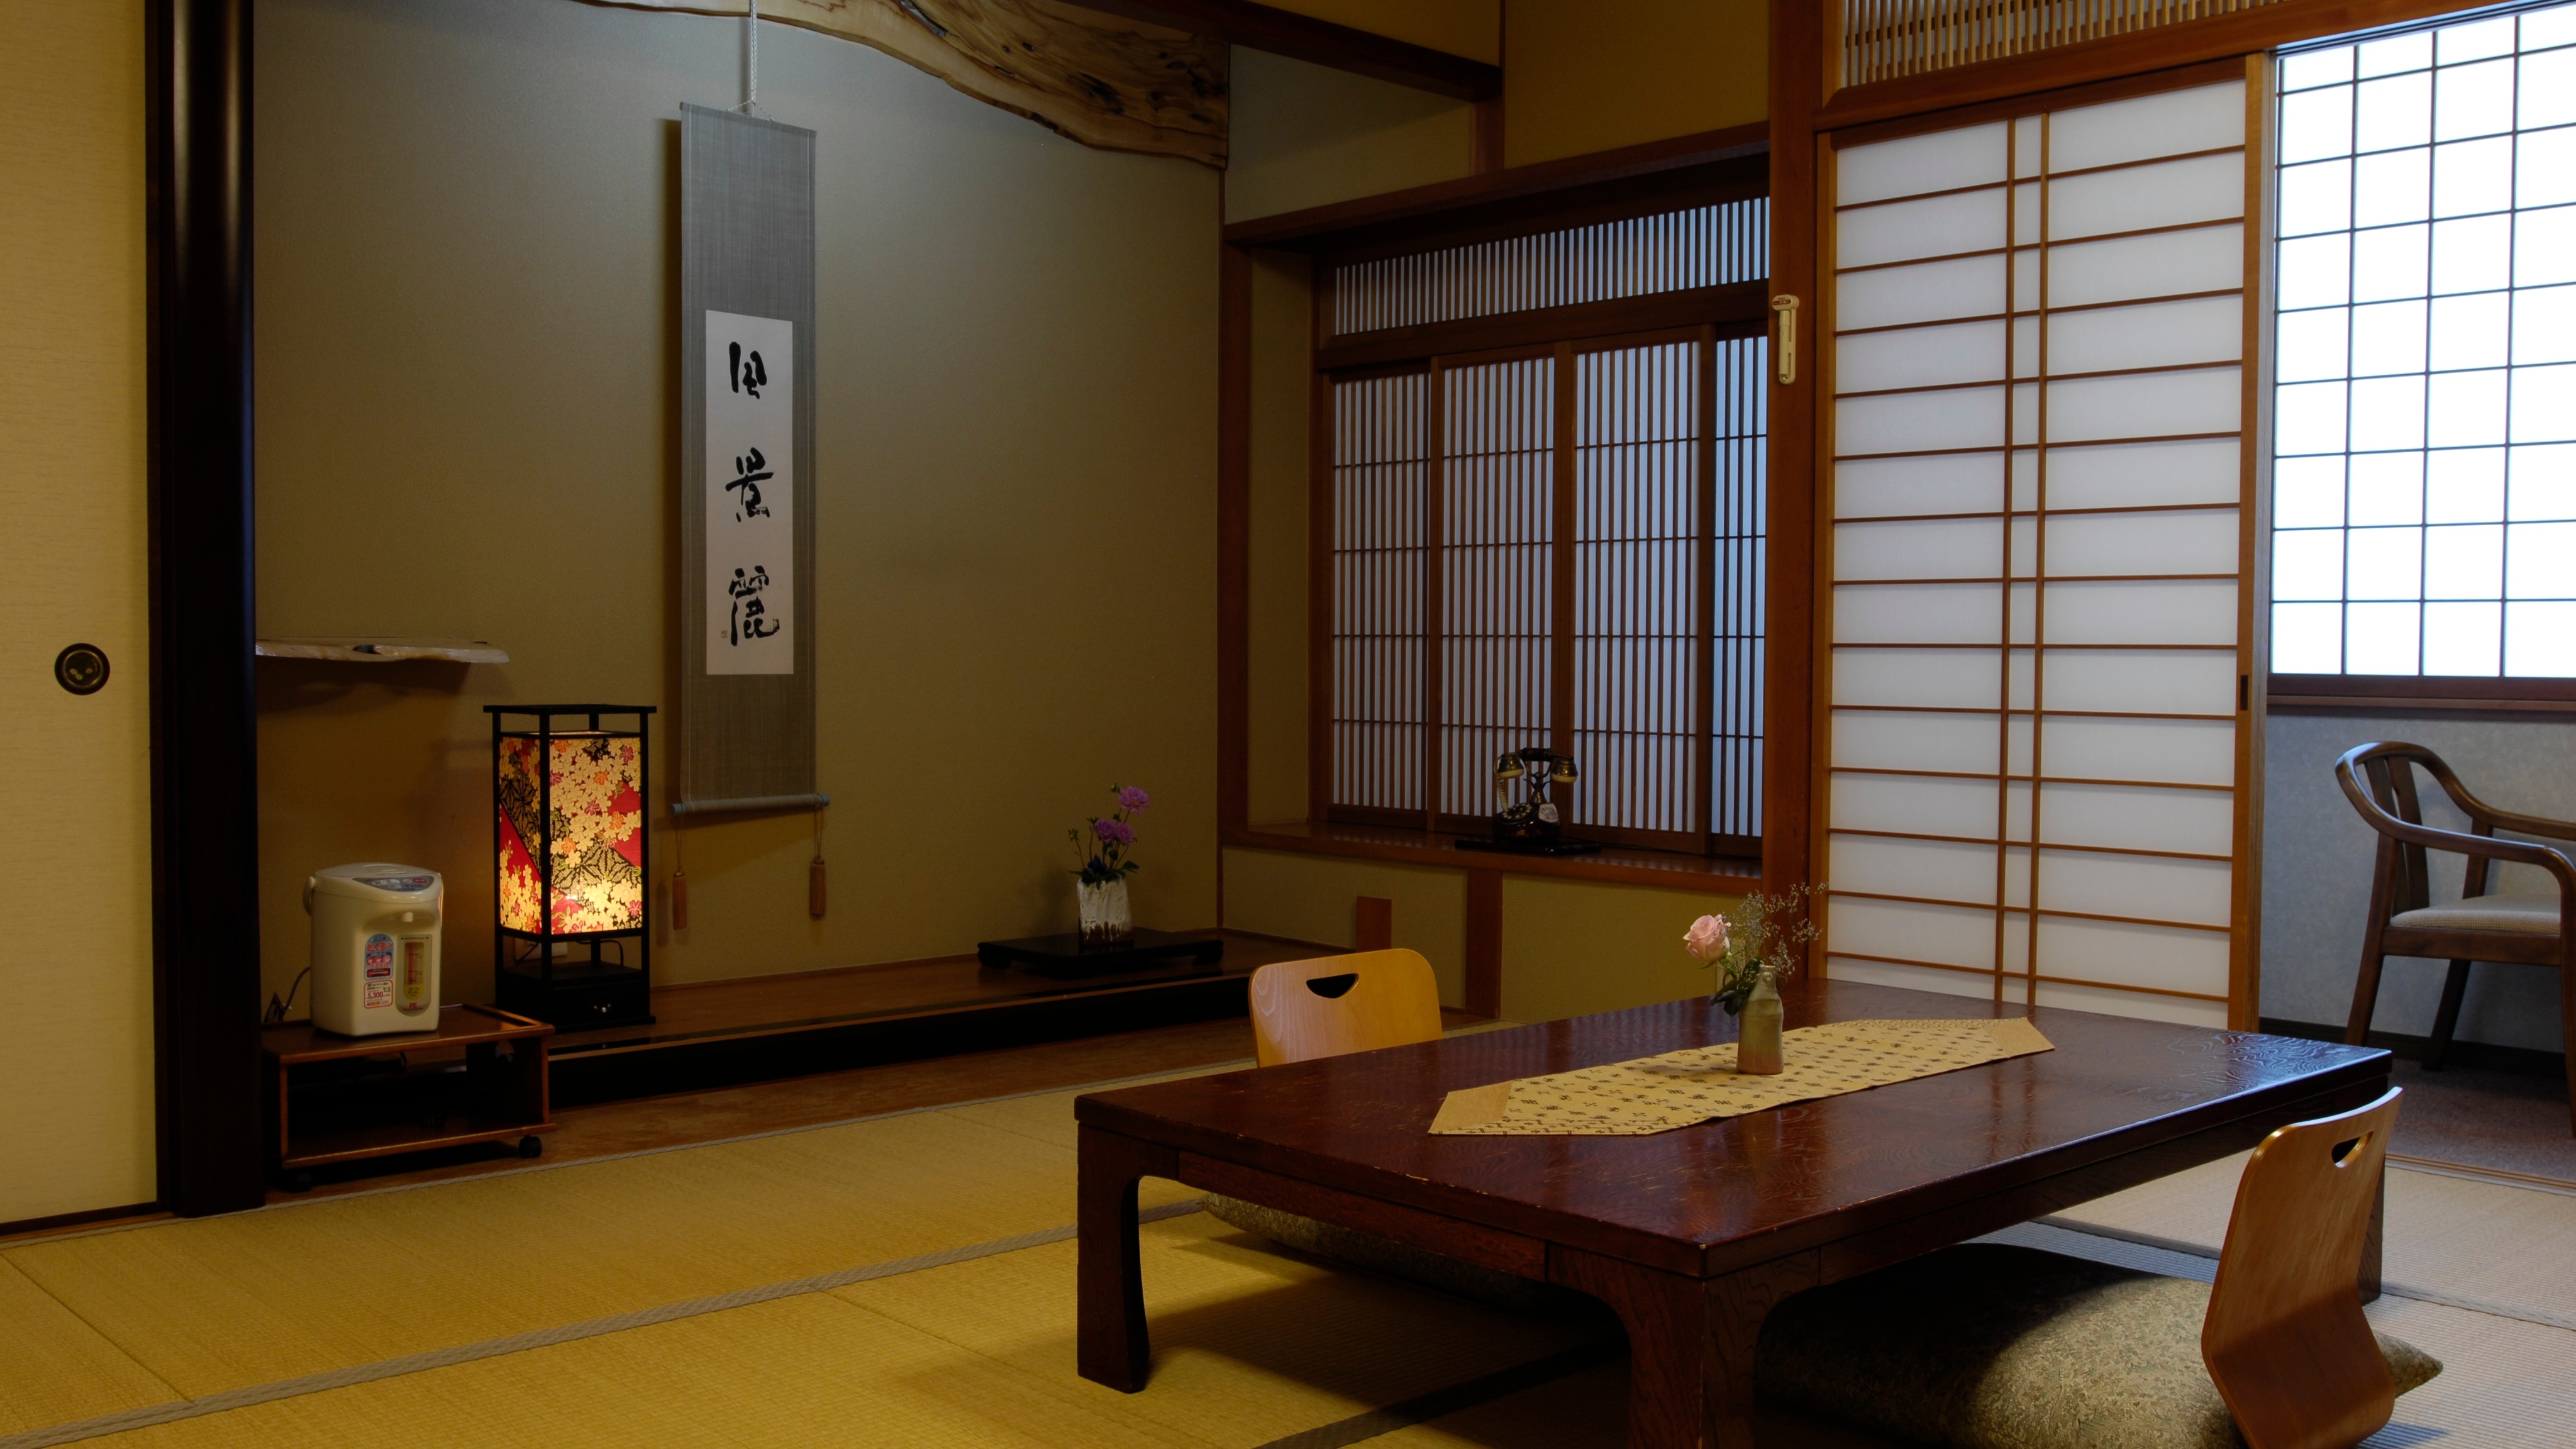 ■ An example of a Japanese-style room with 10 tatami mats